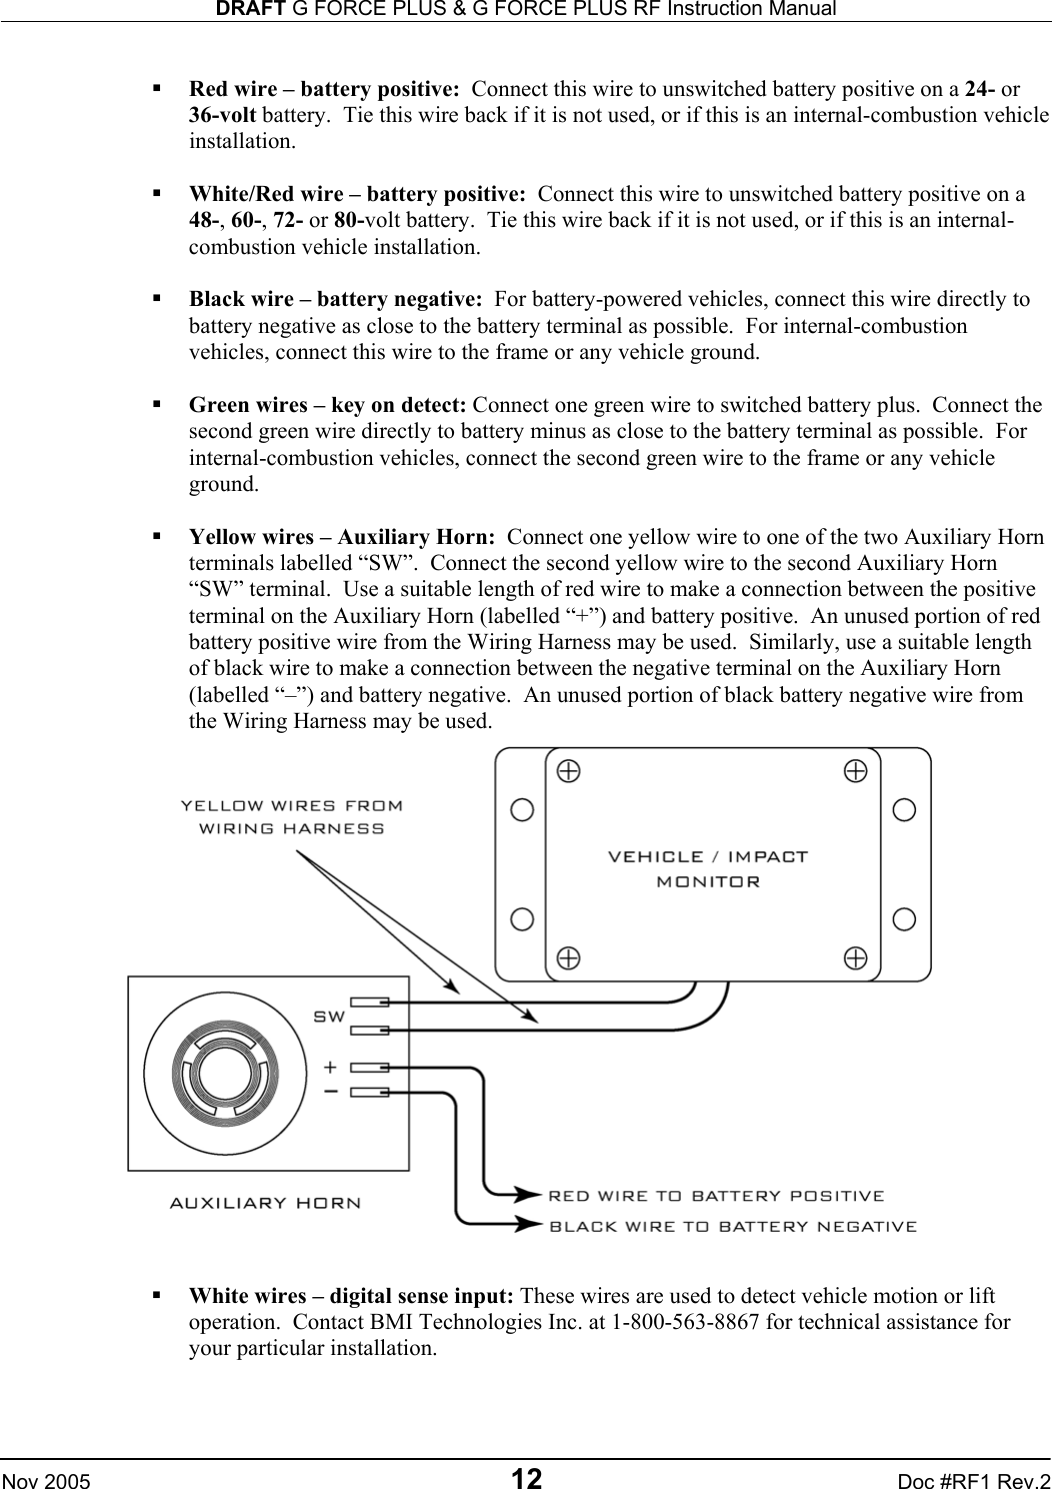 DRAFT G FORCE PLUS &amp; G FORCE PLUS RF Instruction Manual   Nov 2005 12 Doc #RF1 Rev.2    Red wire – battery positive:  Connect this wire to unswitched battery positive on a 24- or 36-volt battery.  Tie this wire back if it is not used, or if this is an internal-combustion vehicle installation.    White/Red wire – battery positive:  Connect this wire to unswitched battery positive on a 48-, 60-, 72- or 80-volt battery.  Tie this wire back if it is not used, or if this is an internal-combustion vehicle installation.    Black wire – battery negative:  For battery-powered vehicles, connect this wire directly to battery negative as close to the battery terminal as possible.  For internal-combustion vehicles, connect this wire to the frame or any vehicle ground.    Green wires – key on detect: Connect one green wire to switched battery plus.  Connect the second green wire directly to battery minus as close to the battery terminal as possible.  For internal-combustion vehicles, connect the second green wire to the frame or any vehicle ground.    Yellow wires – Auxiliary Horn:  Connect one yellow wire to one of the two Auxiliary Horn terminals labelled “SW”.  Connect the second yellow wire to the second Auxiliary Horn “SW” terminal.  Use a suitable length of red wire to make a connection between the positive terminal on the Auxiliary Horn (labelled “+”) and battery positive.  An unused portion of red battery positive wire from the Wiring Harness may be used.  Similarly, use a suitable length of black wire to make a connection between the negative terminal on the Auxiliary Horn (labelled “–”) and battery negative.  An unused portion of black battery negative wire from the Wiring Harness may be used.     White wires – digital sense input: These wires are used to detect vehicle motion or lift operation.  Contact BMI Technologies Inc. at 1-800-563-8867 for technical assistance for your particular installation.    